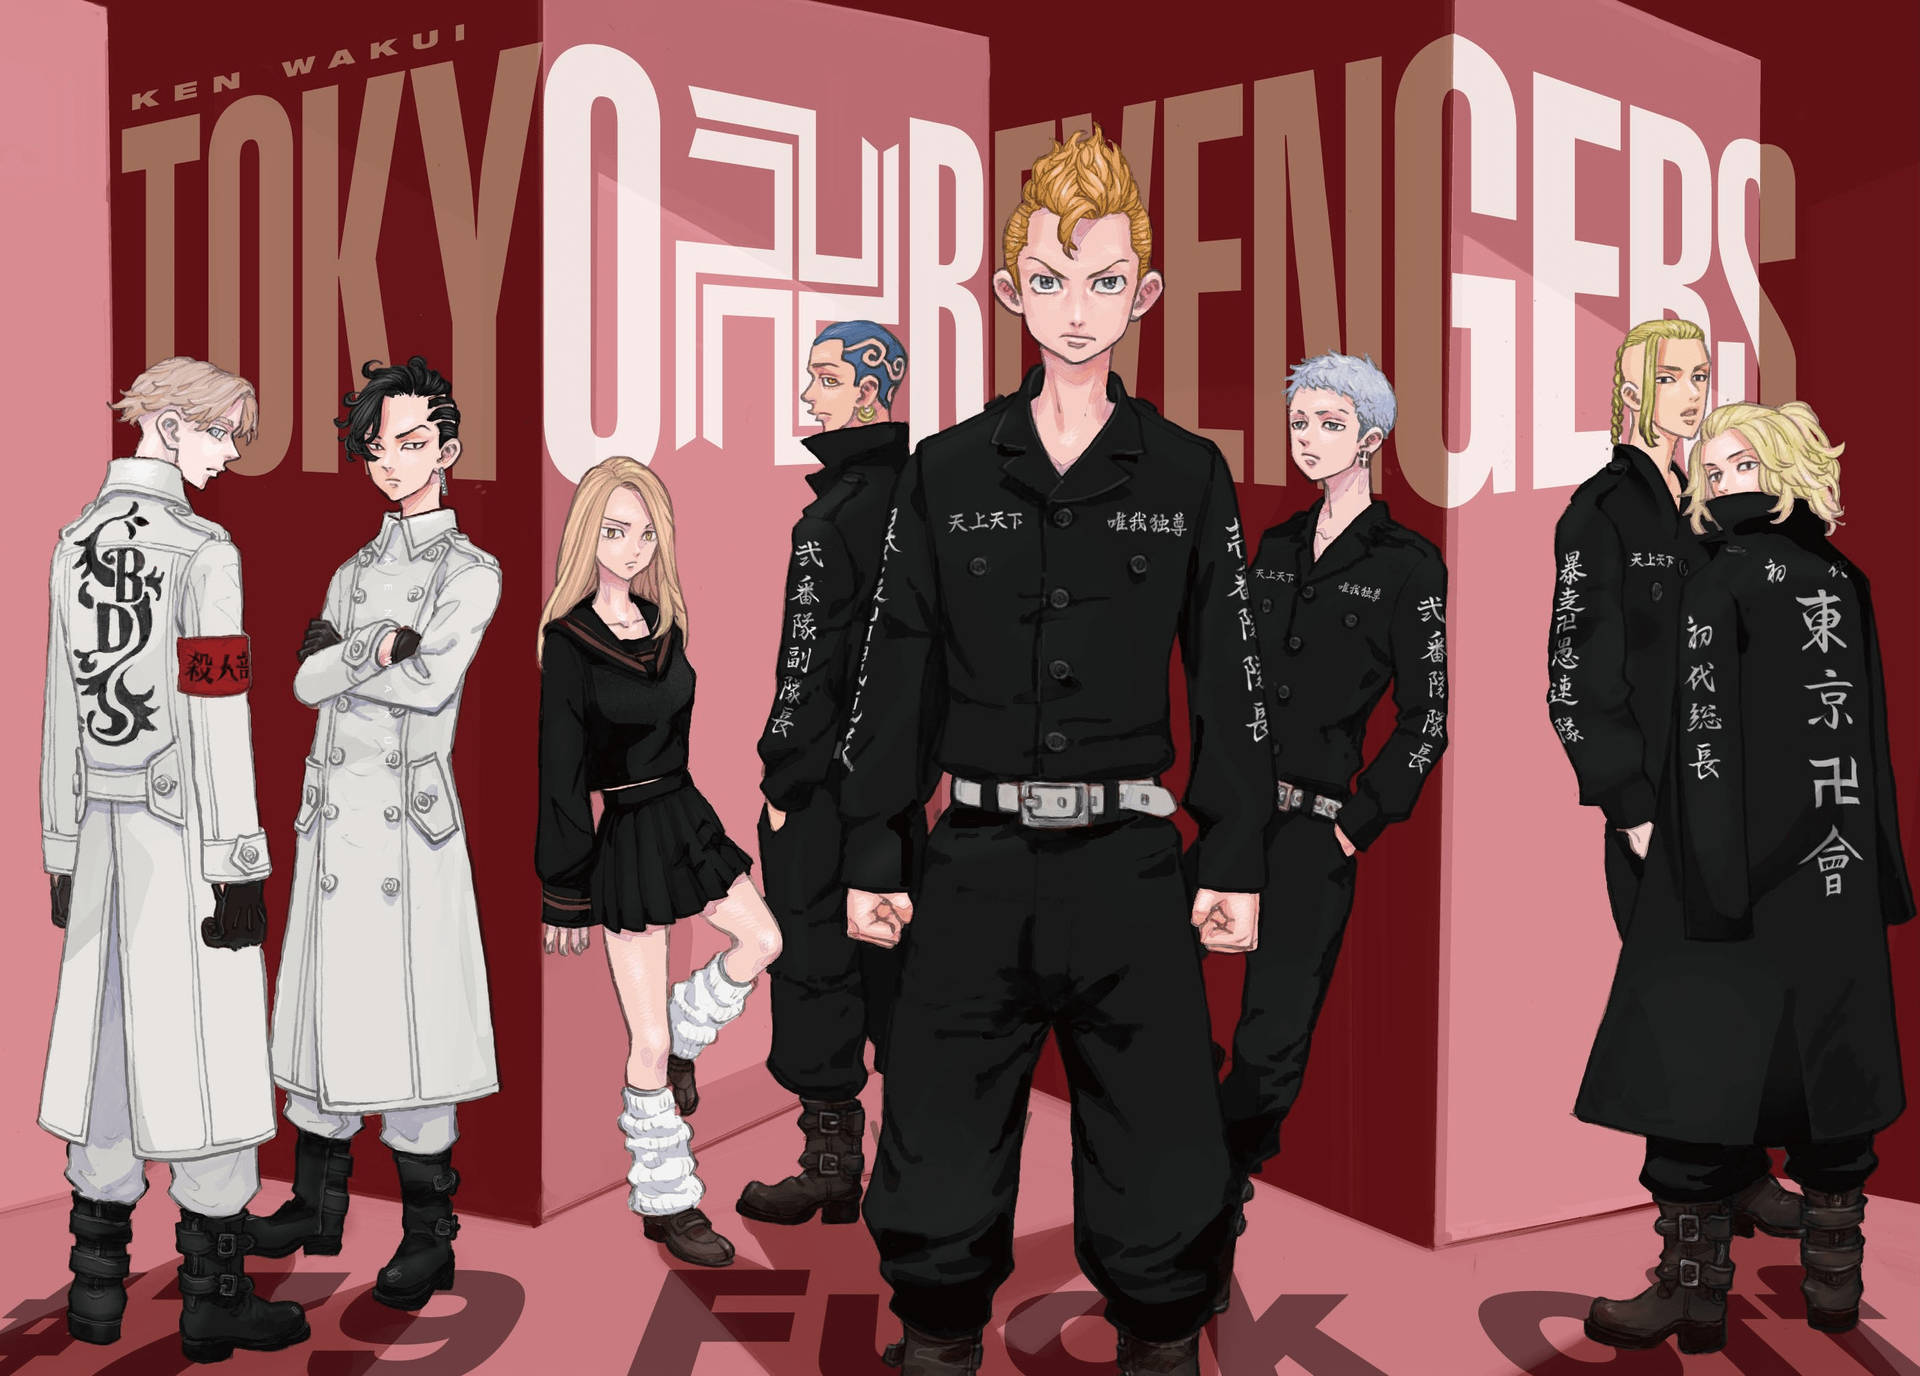 Get ready for a wild ride when the Tokyo Revengers hit the road Wallpaper